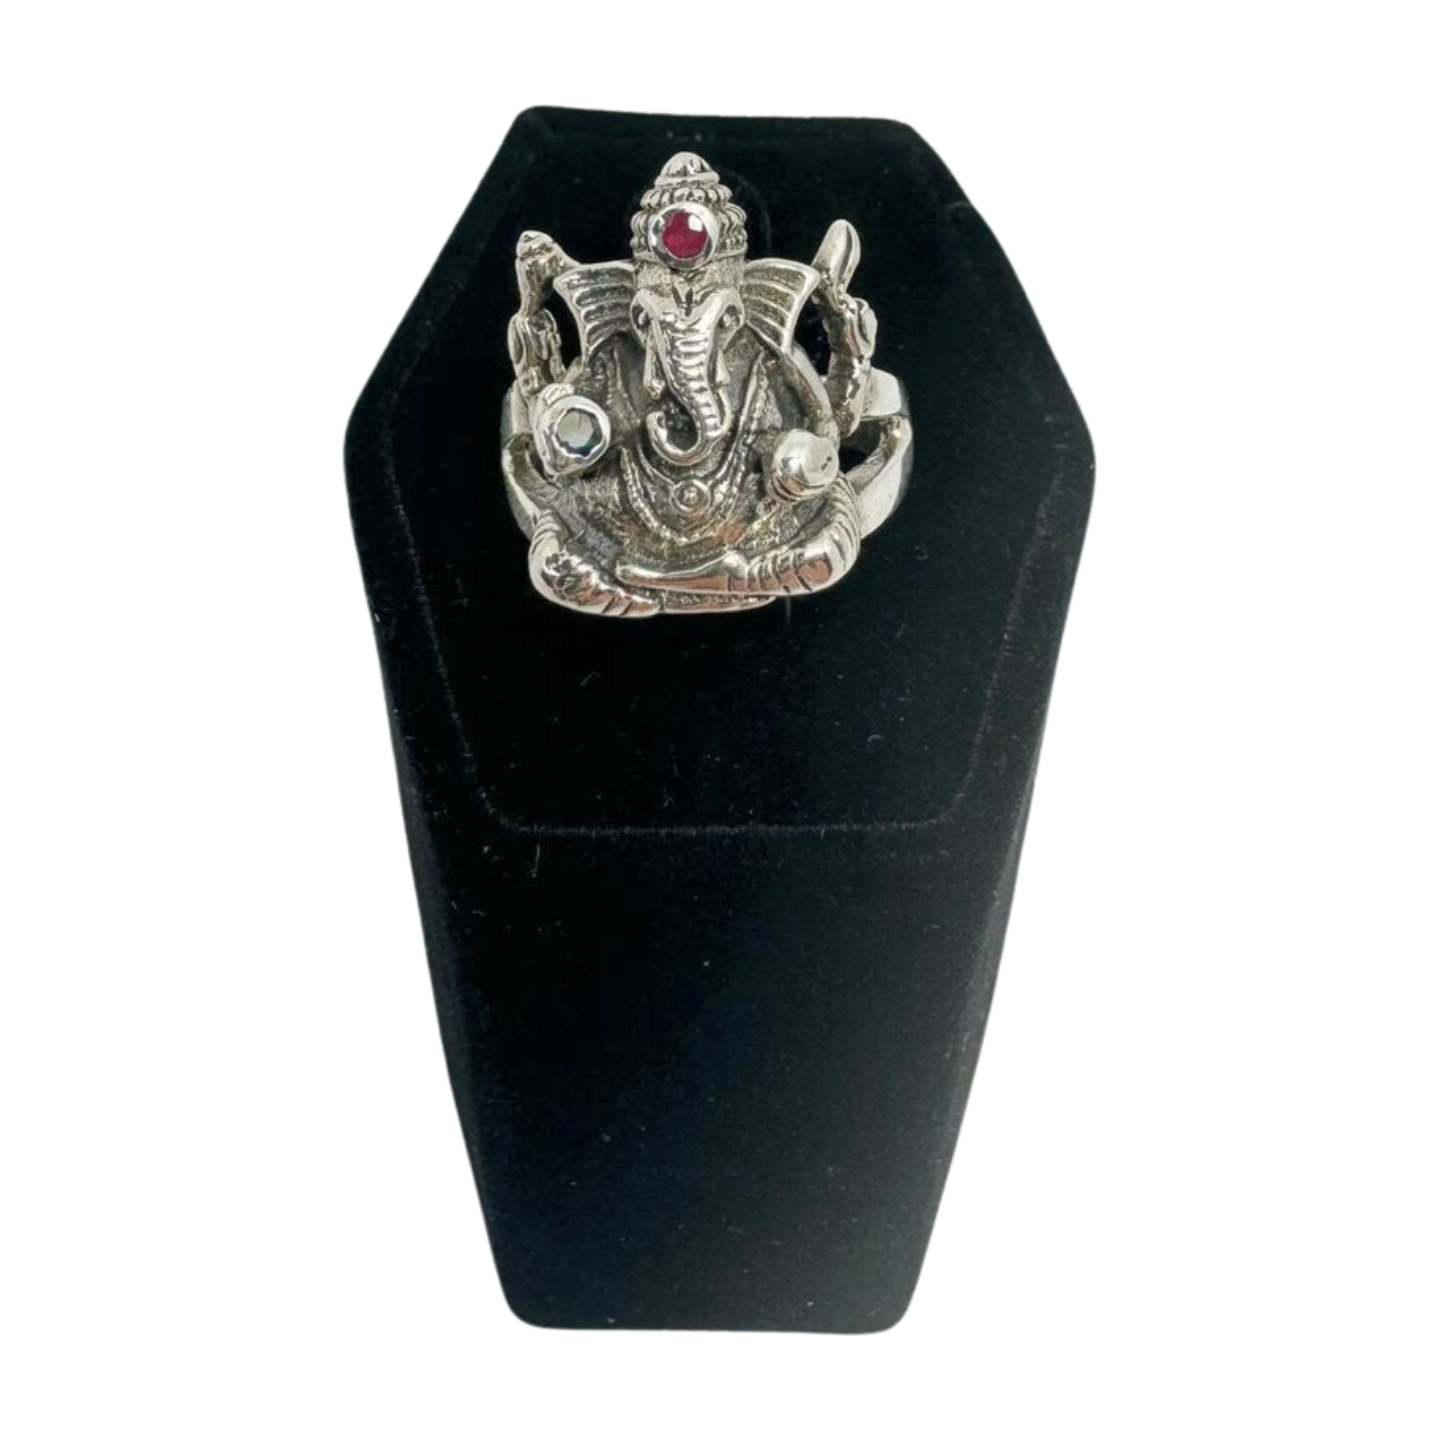 Ganesha Ring with Ruby and Sapphire